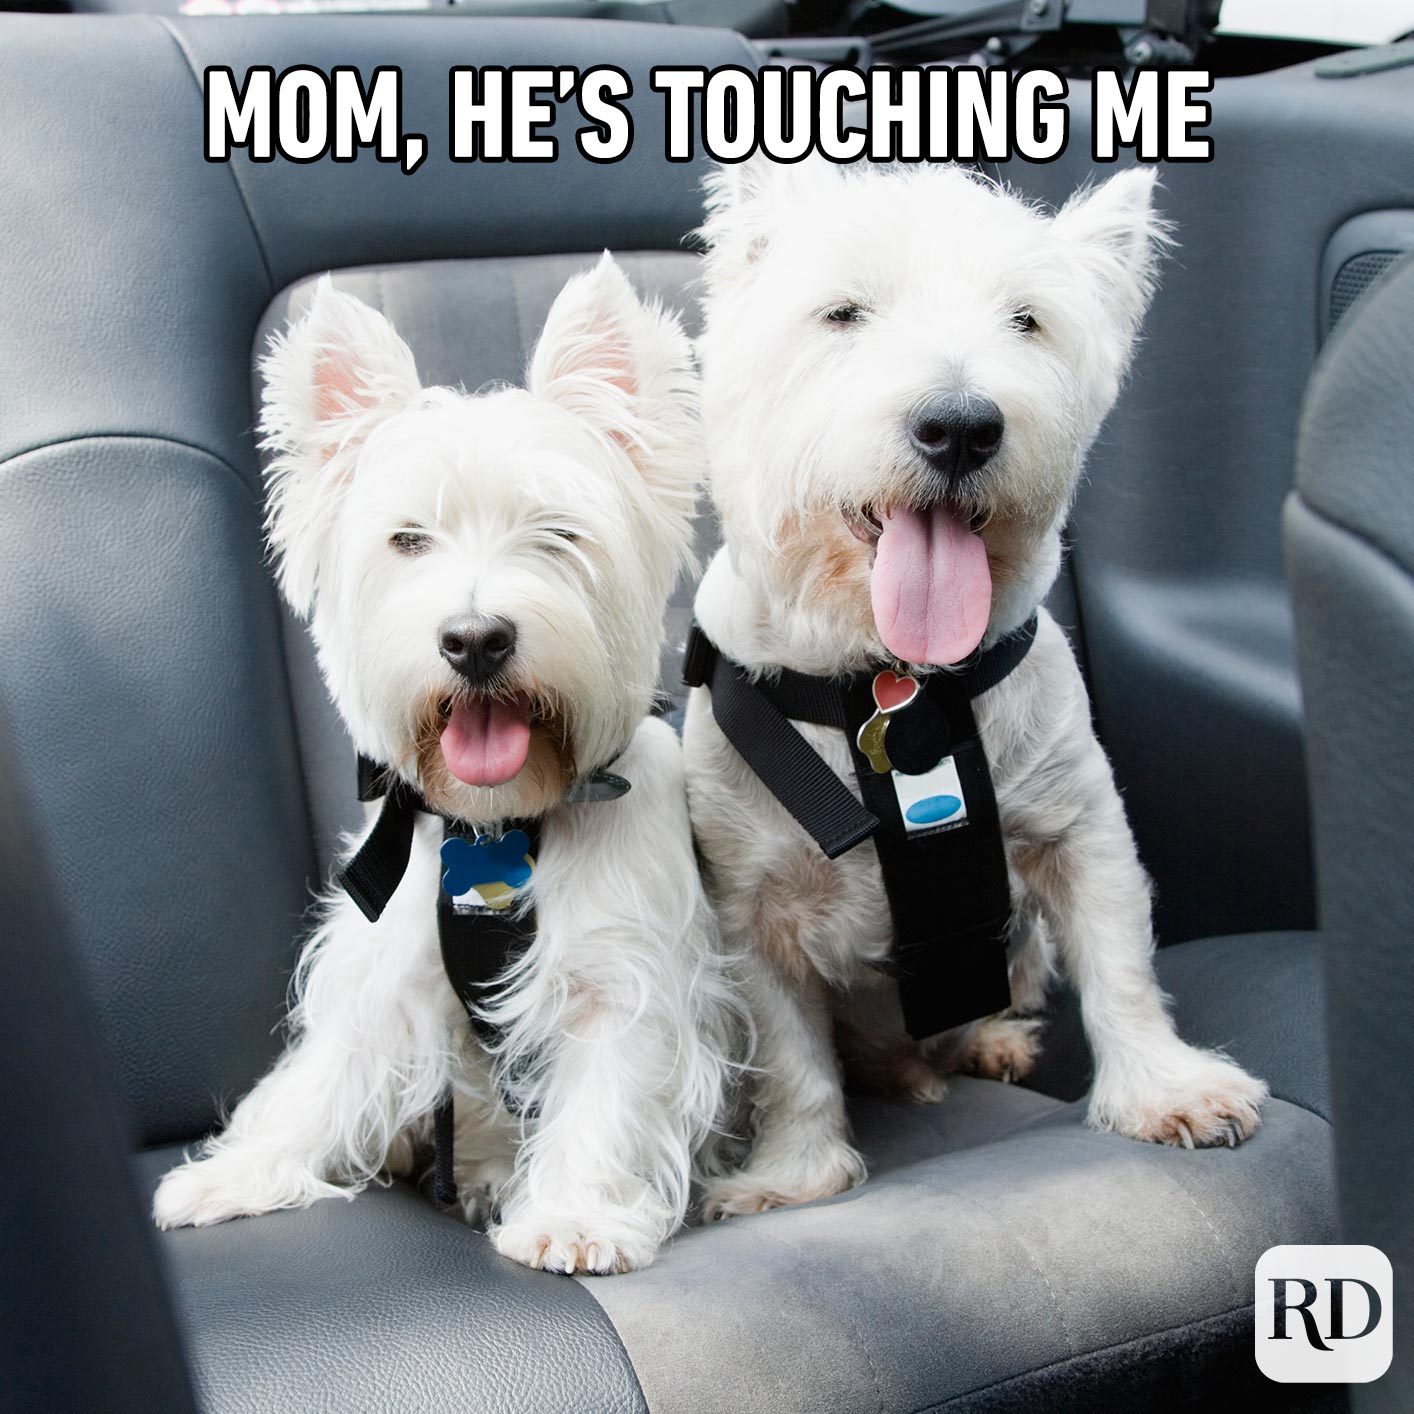 Two dogs in a car. Meme text: Mom, he’s touching me